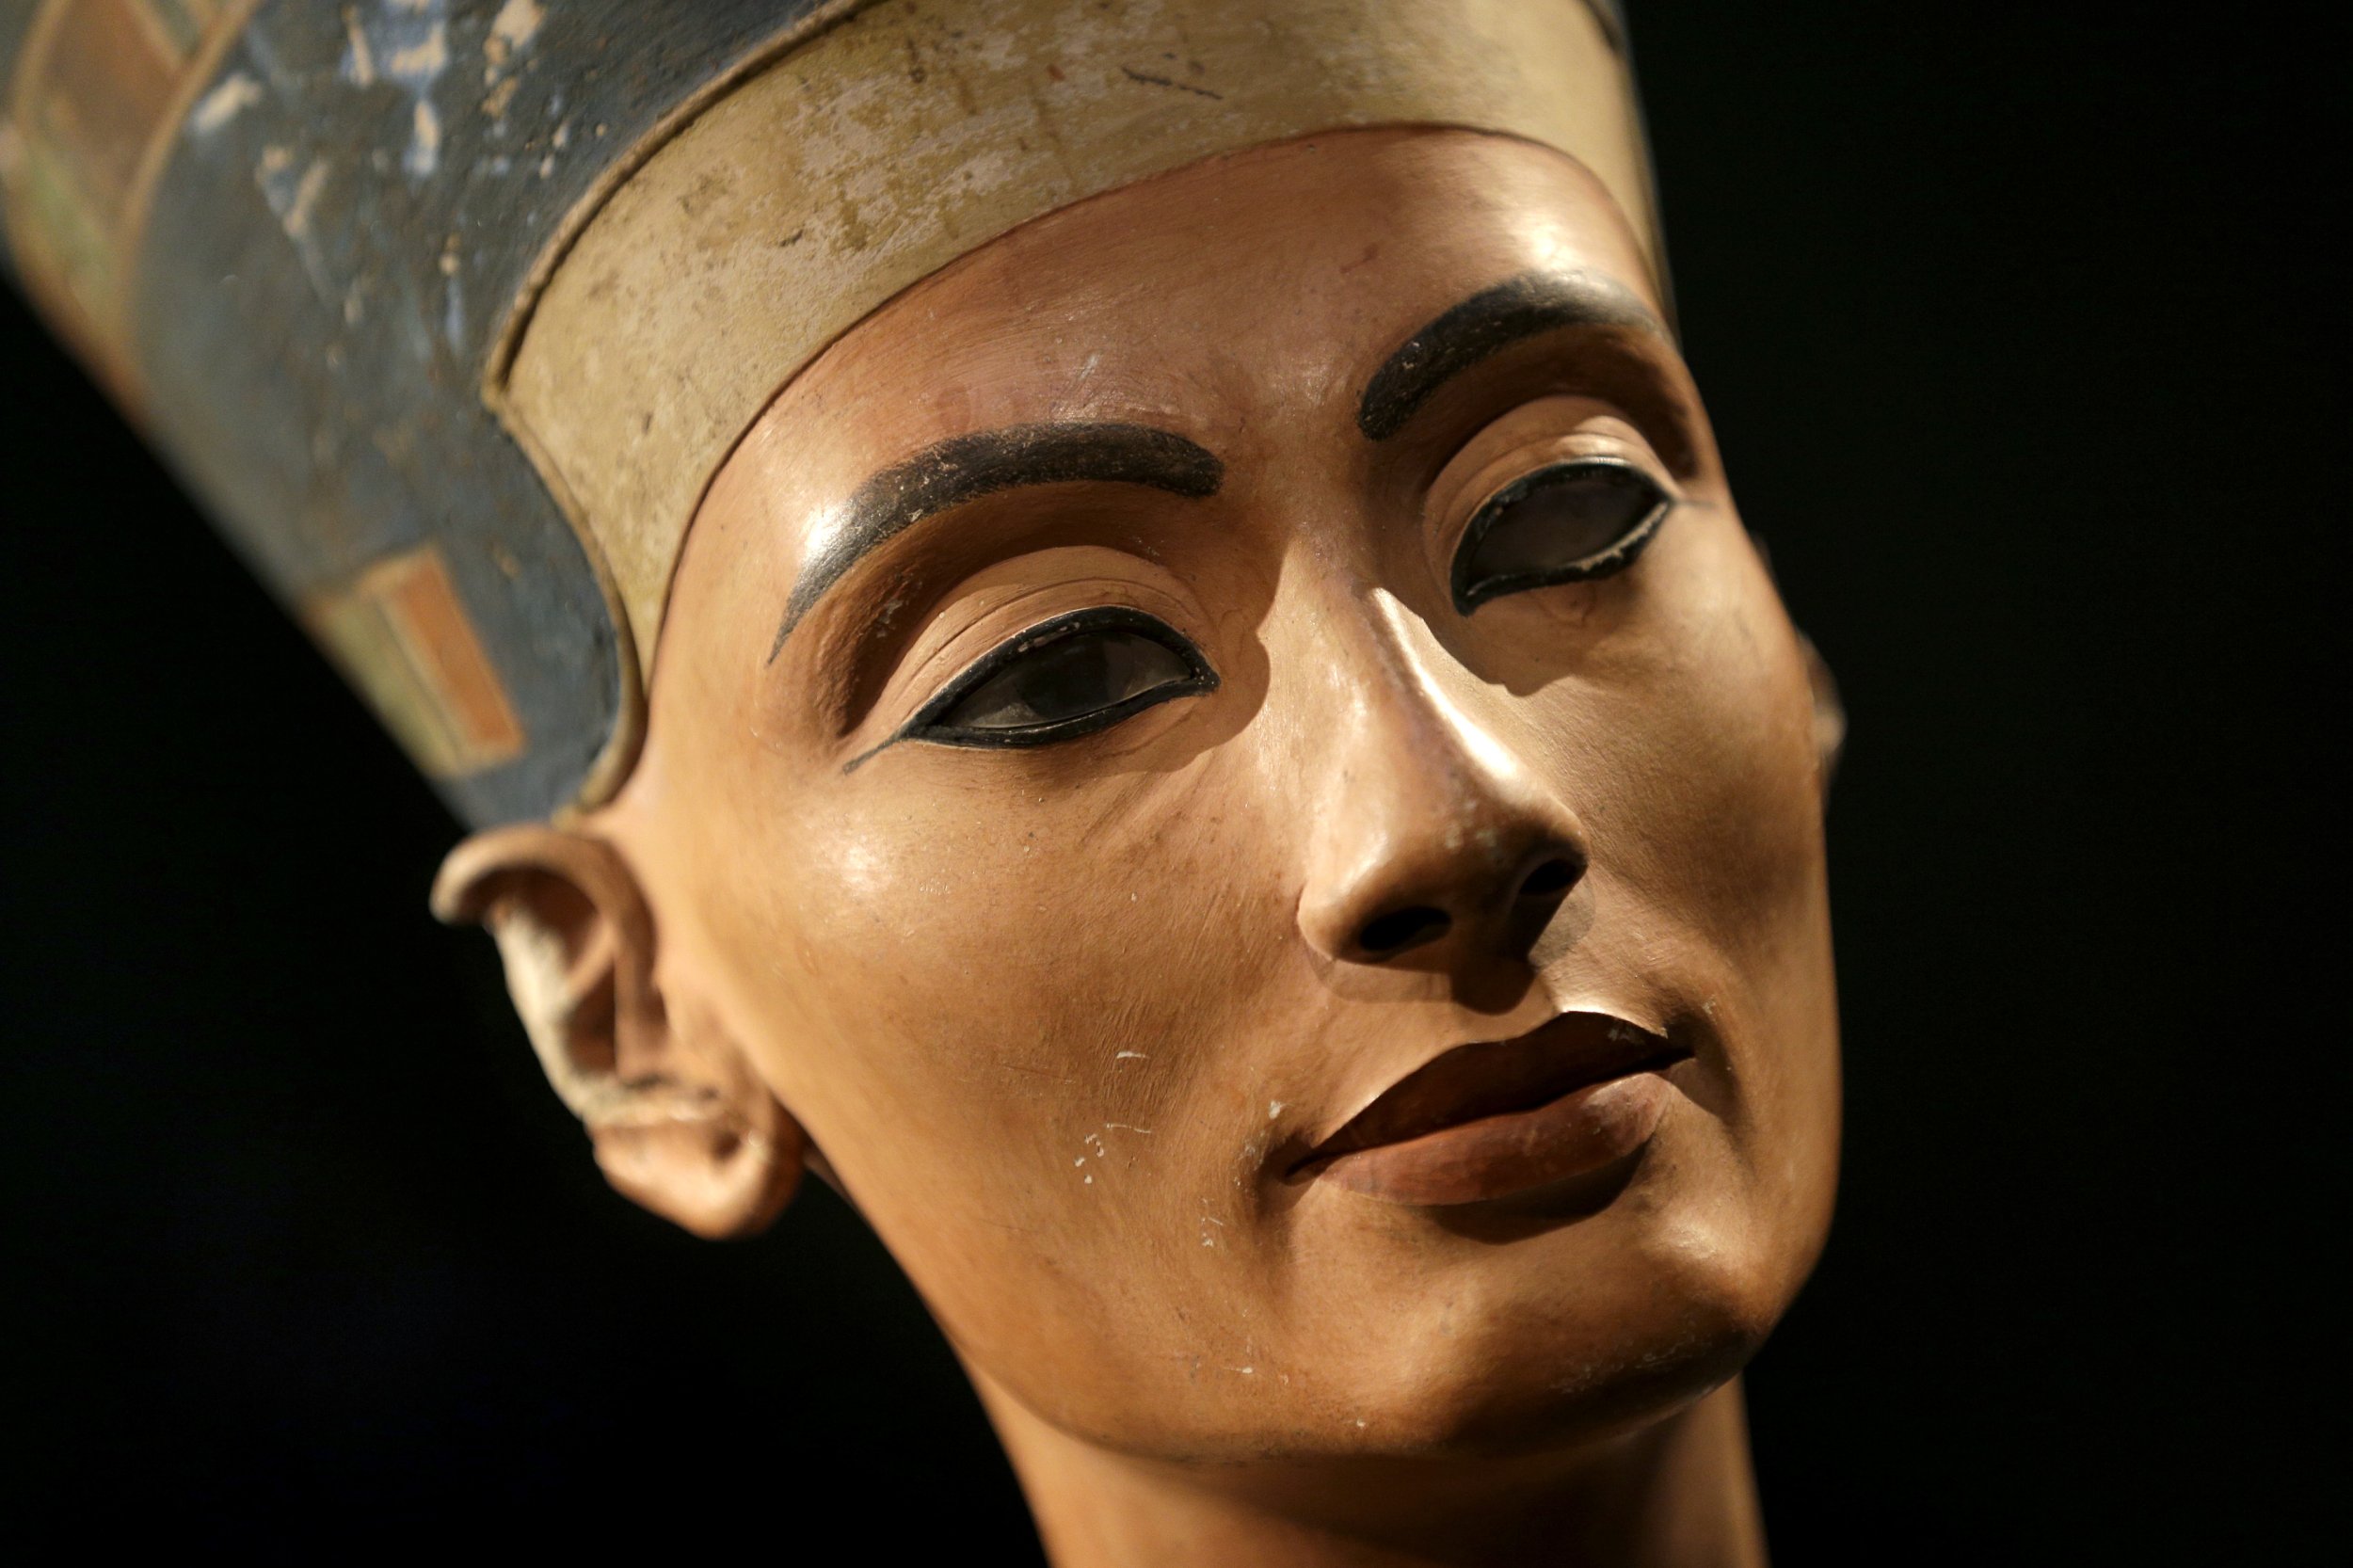 Nefertiti Tomb Discovered Egyptian Queens Secret Chamber Buried Near King Tuts Archaeologist